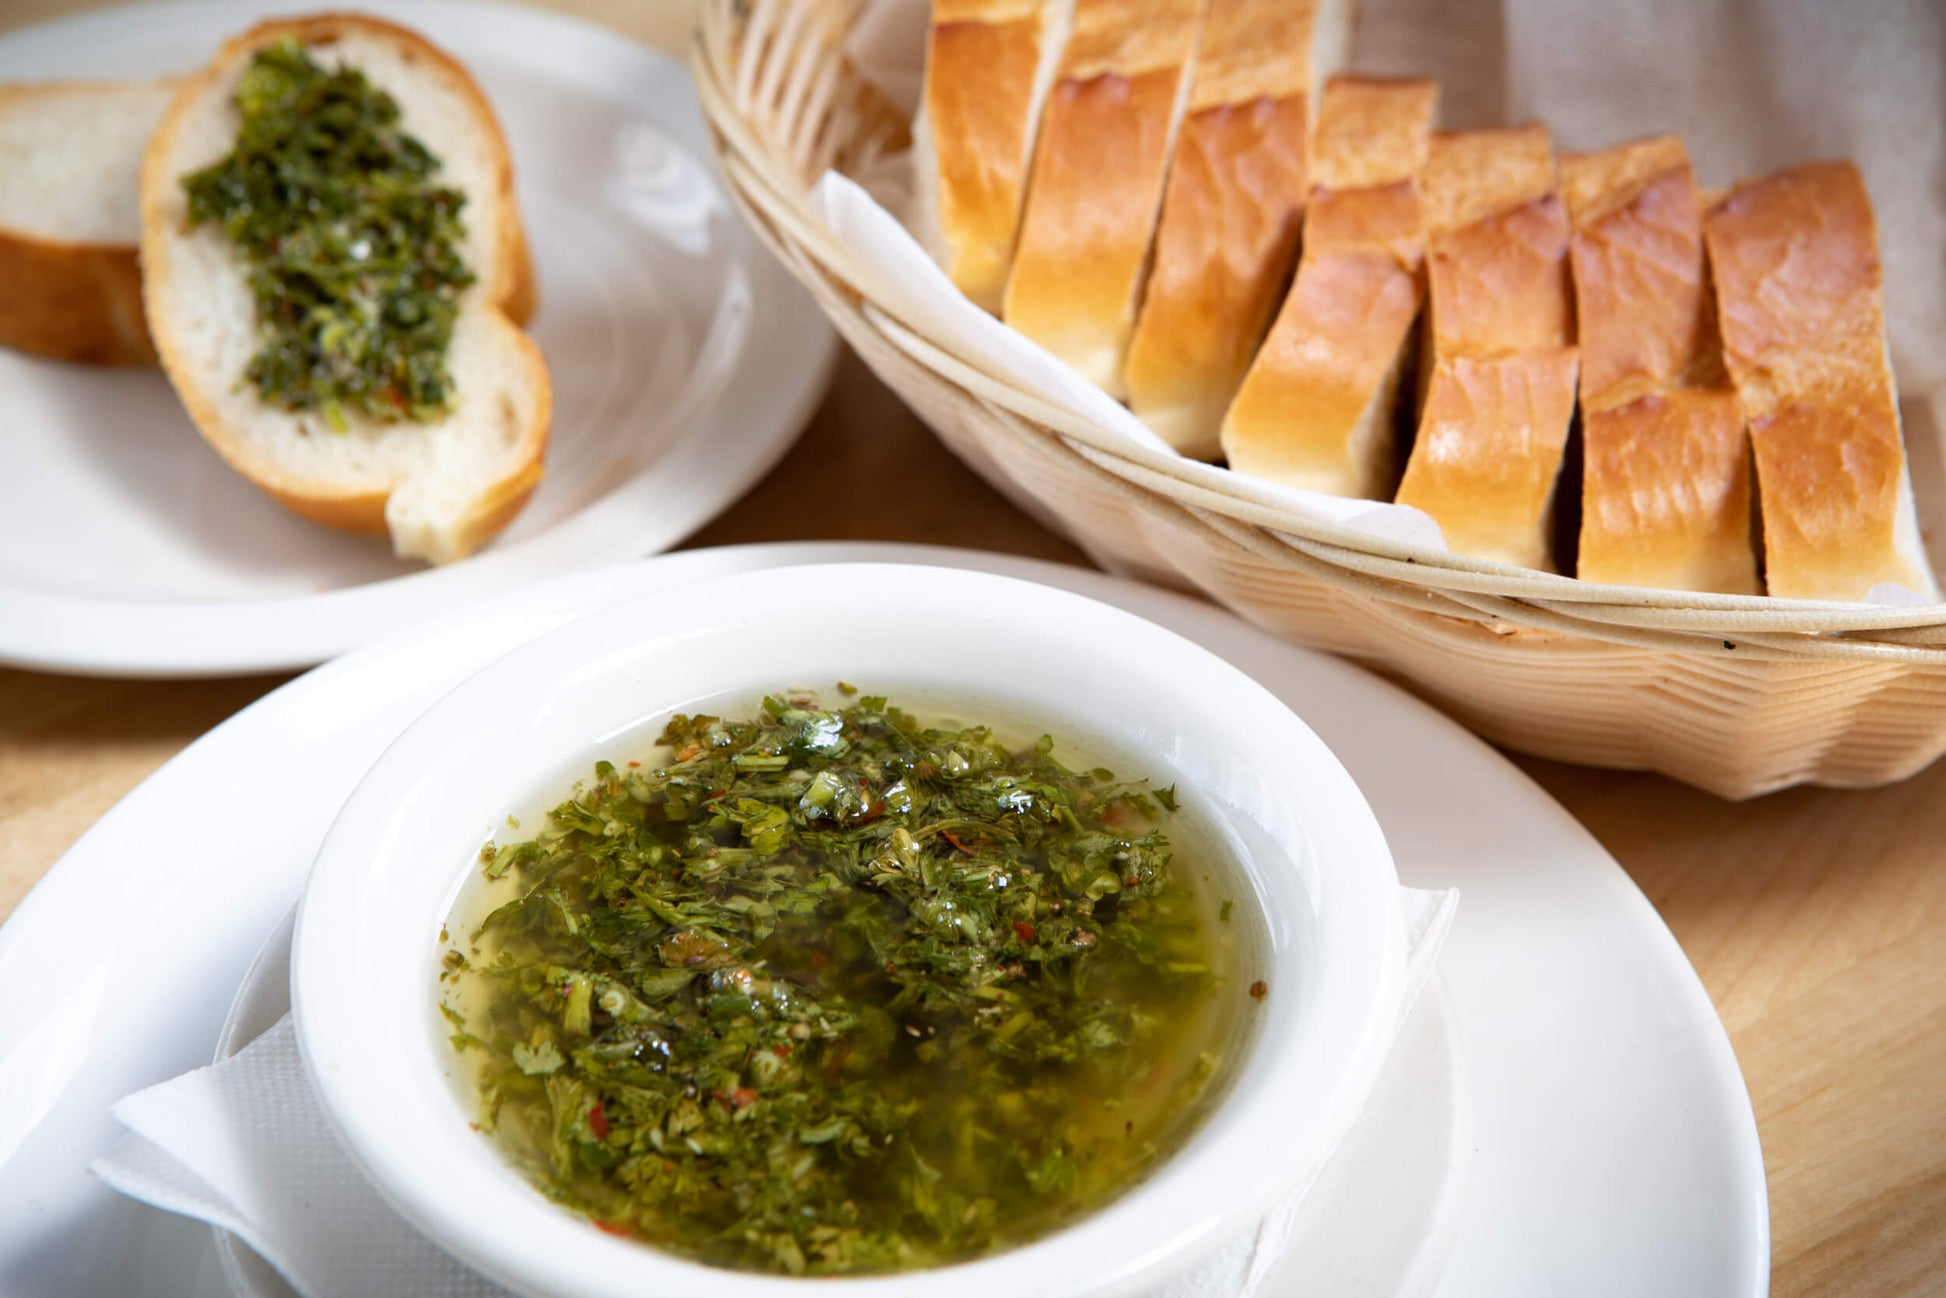 LALA'S homemade chimichurri served with bread